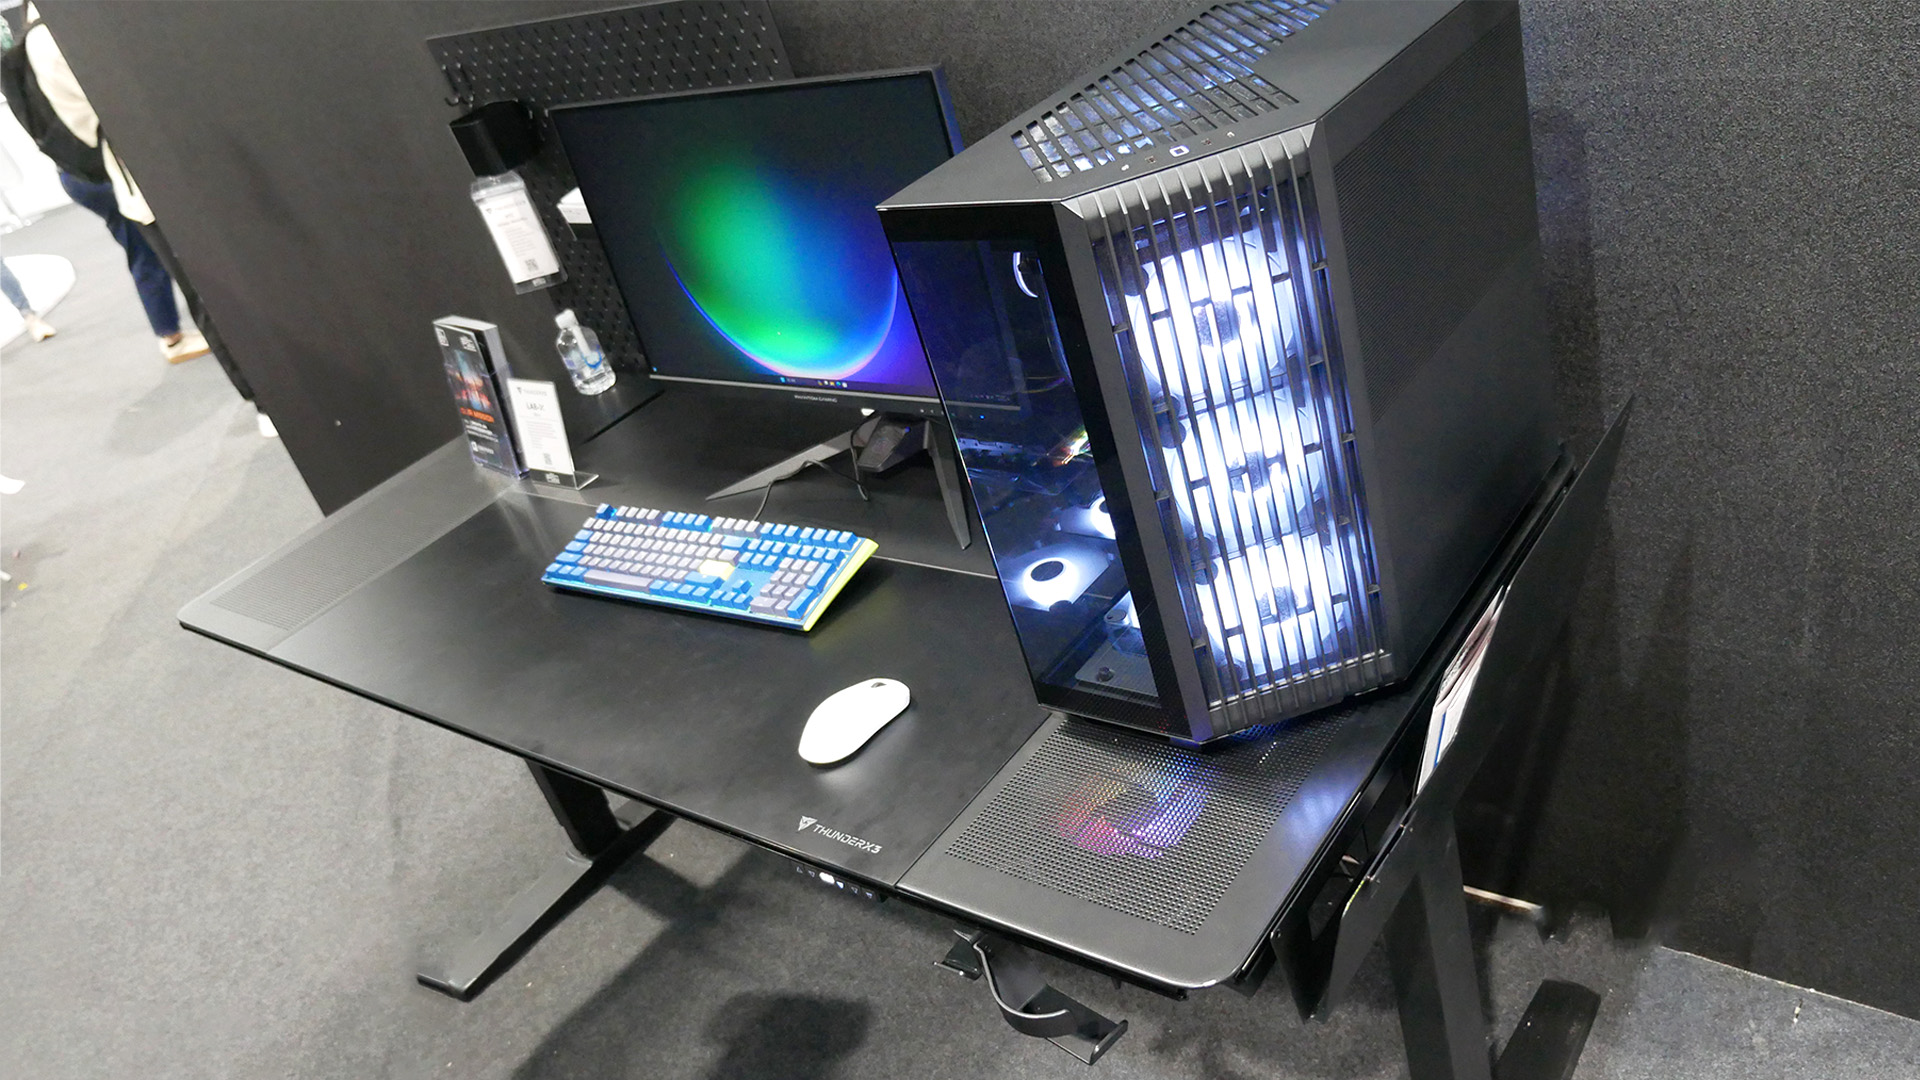 This new PC gaming desk could cool your rig by up to 5°C